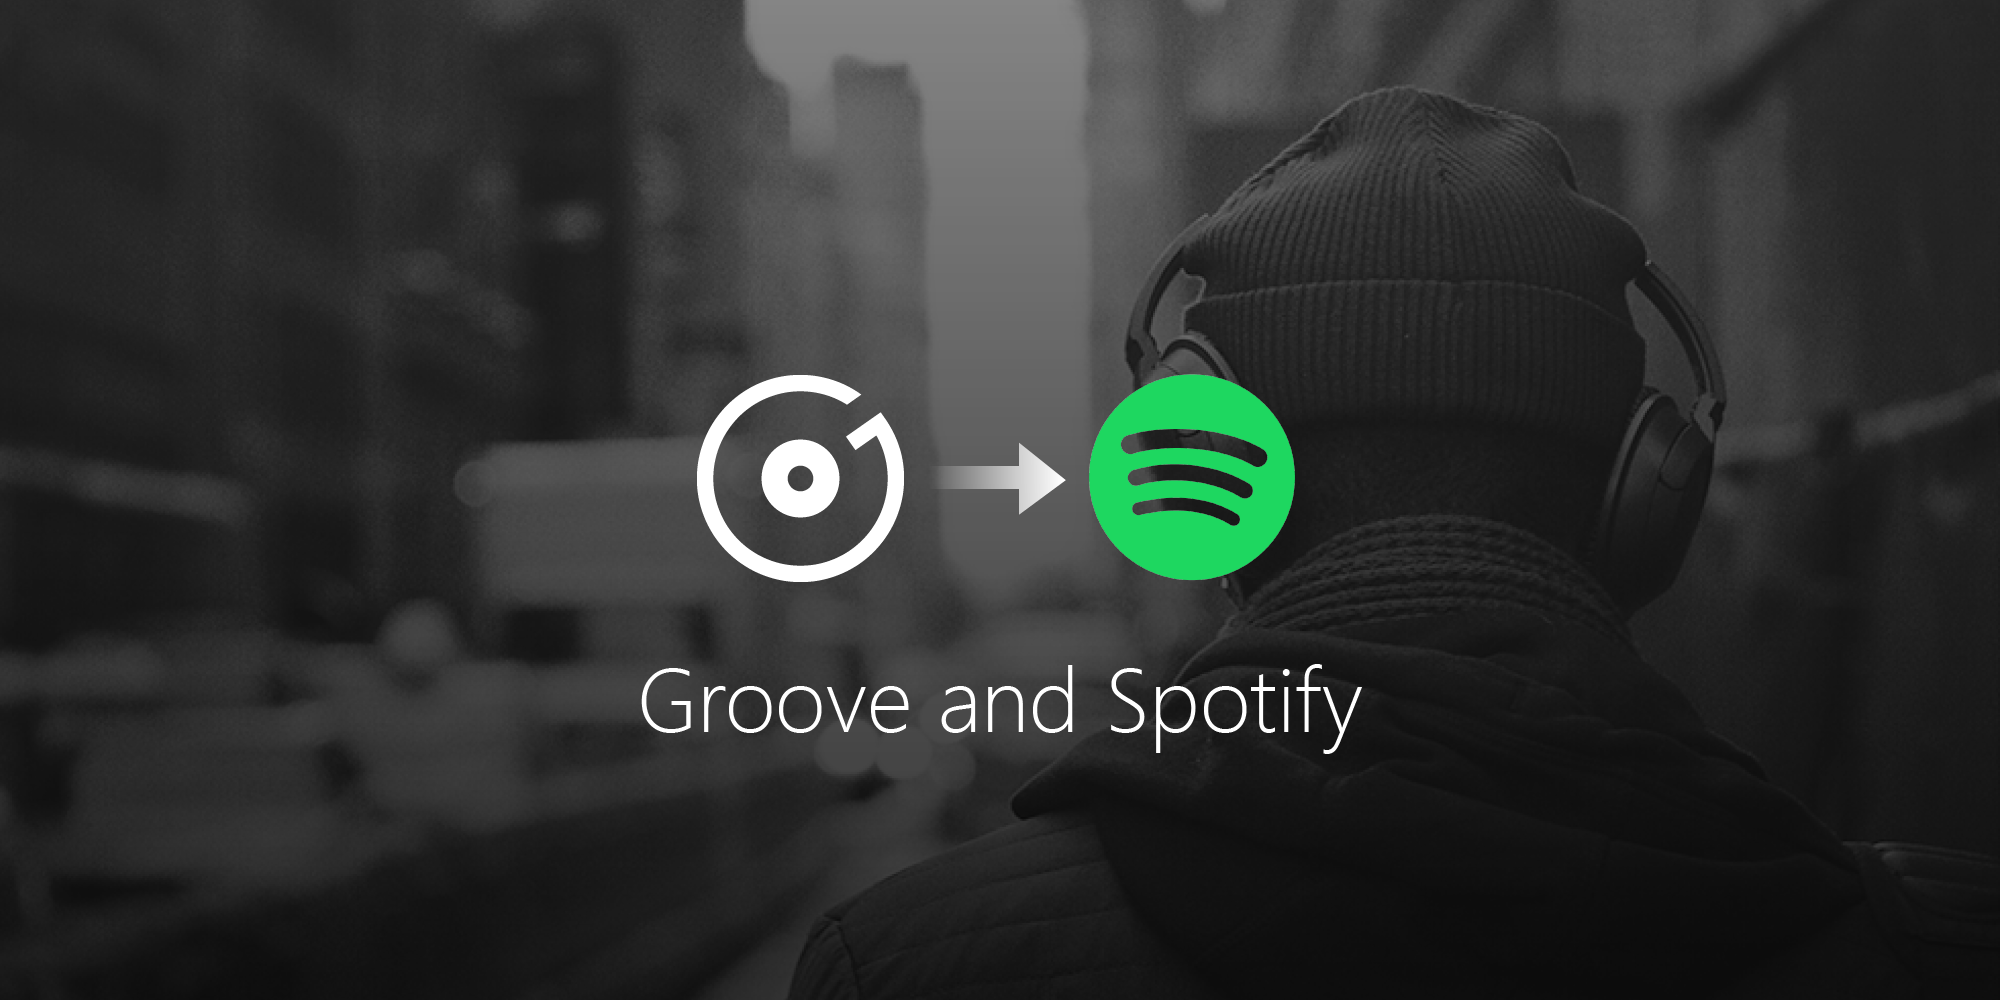 Cortana Suddenly Tries to Access Groove Music Instead of Spotify 76883a46f8bb9e7e79e67224d447b89d.png